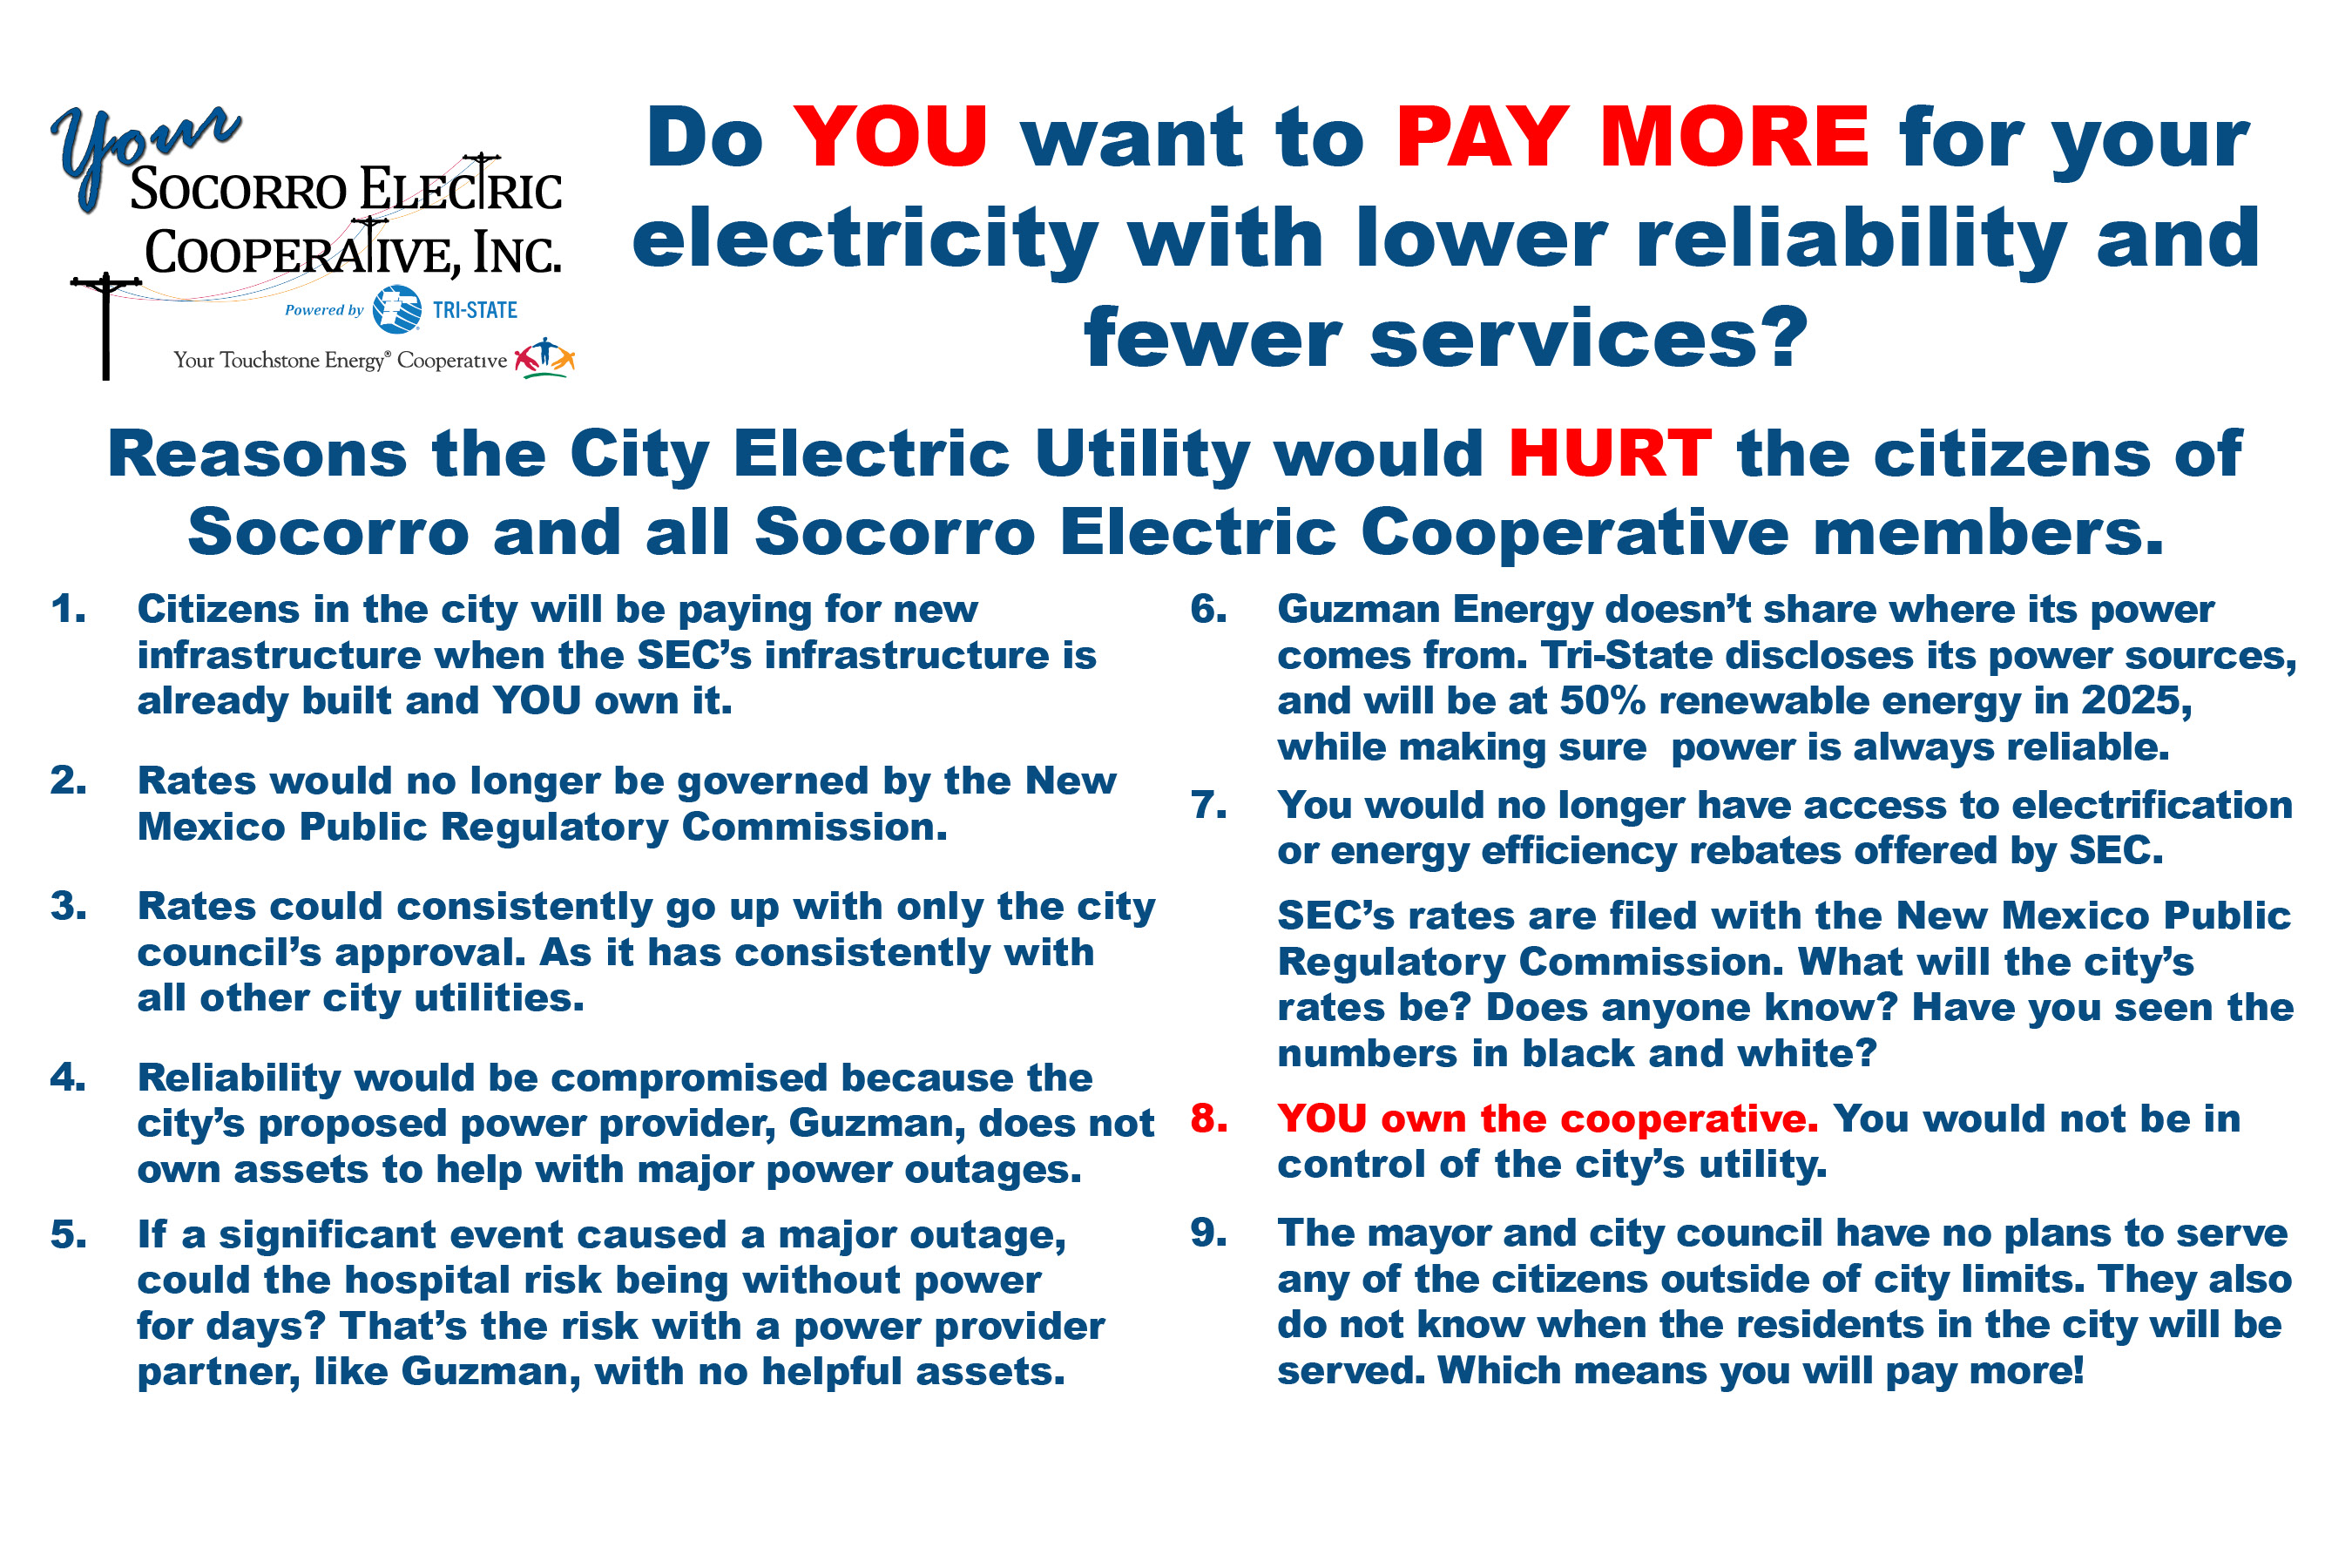 You will pay more for electricity.